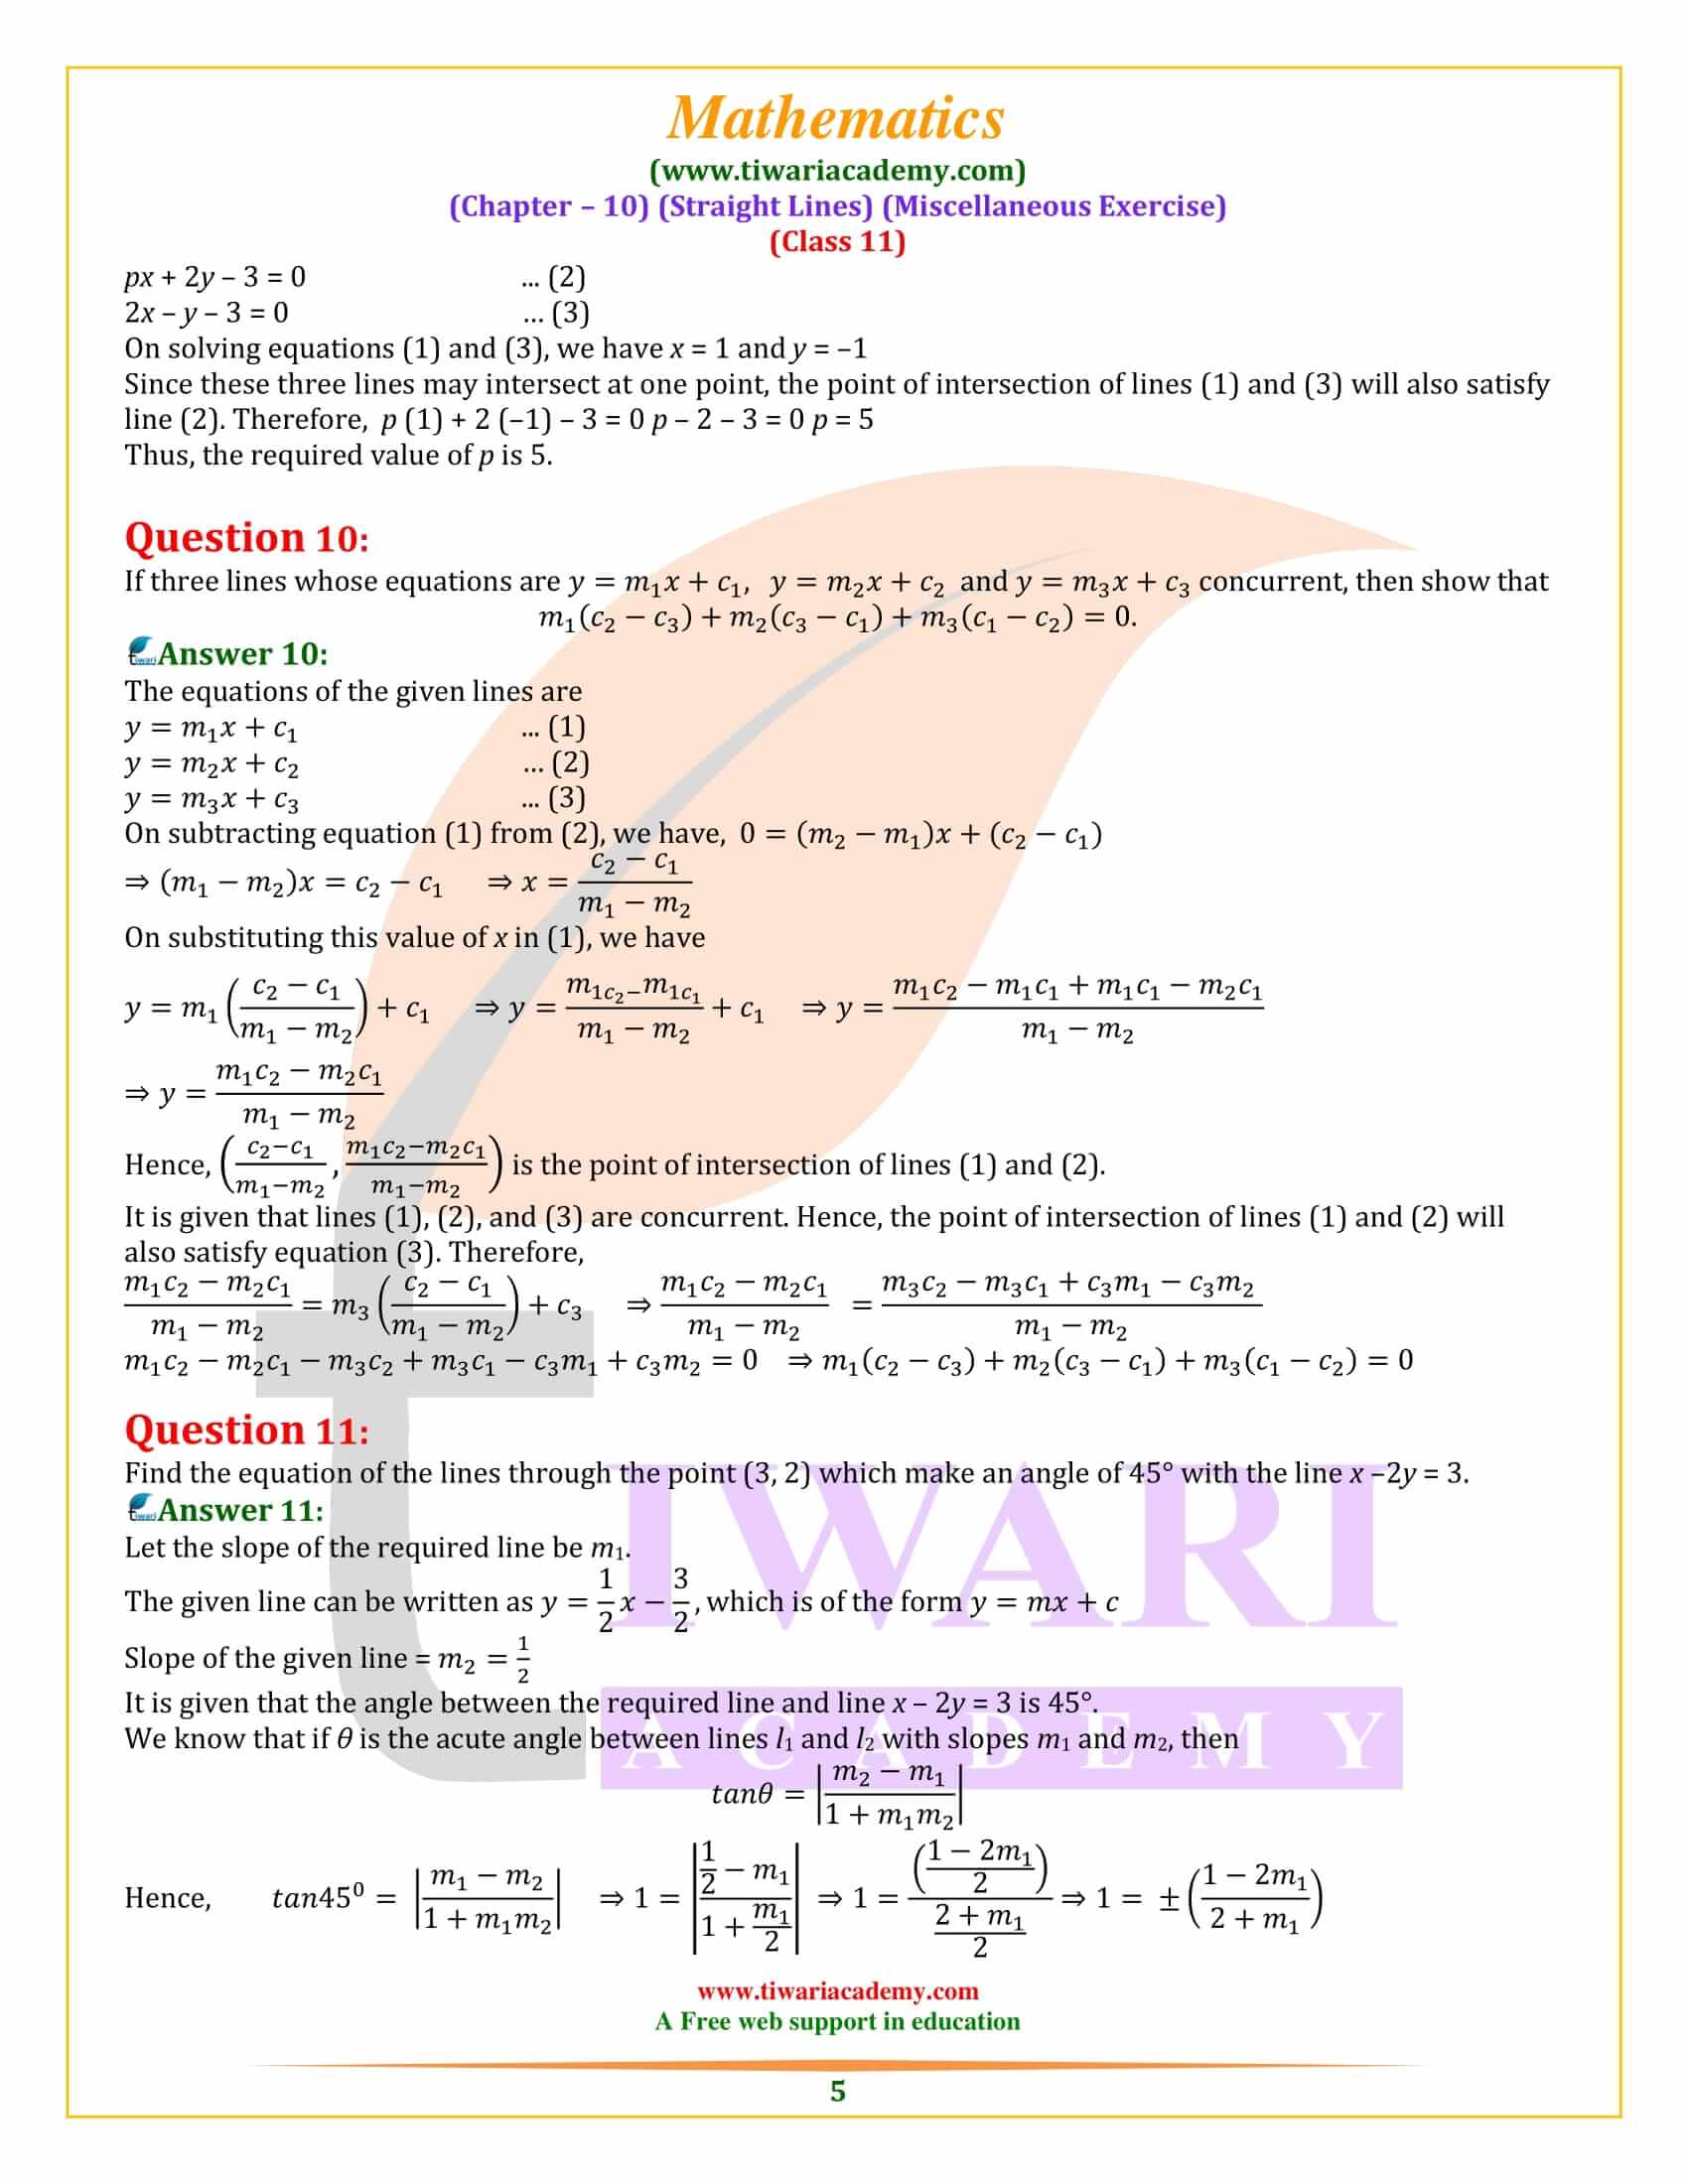 NCERT Solutions for Class 11 Maths Chapter 10 Miscellaneous Exercise download